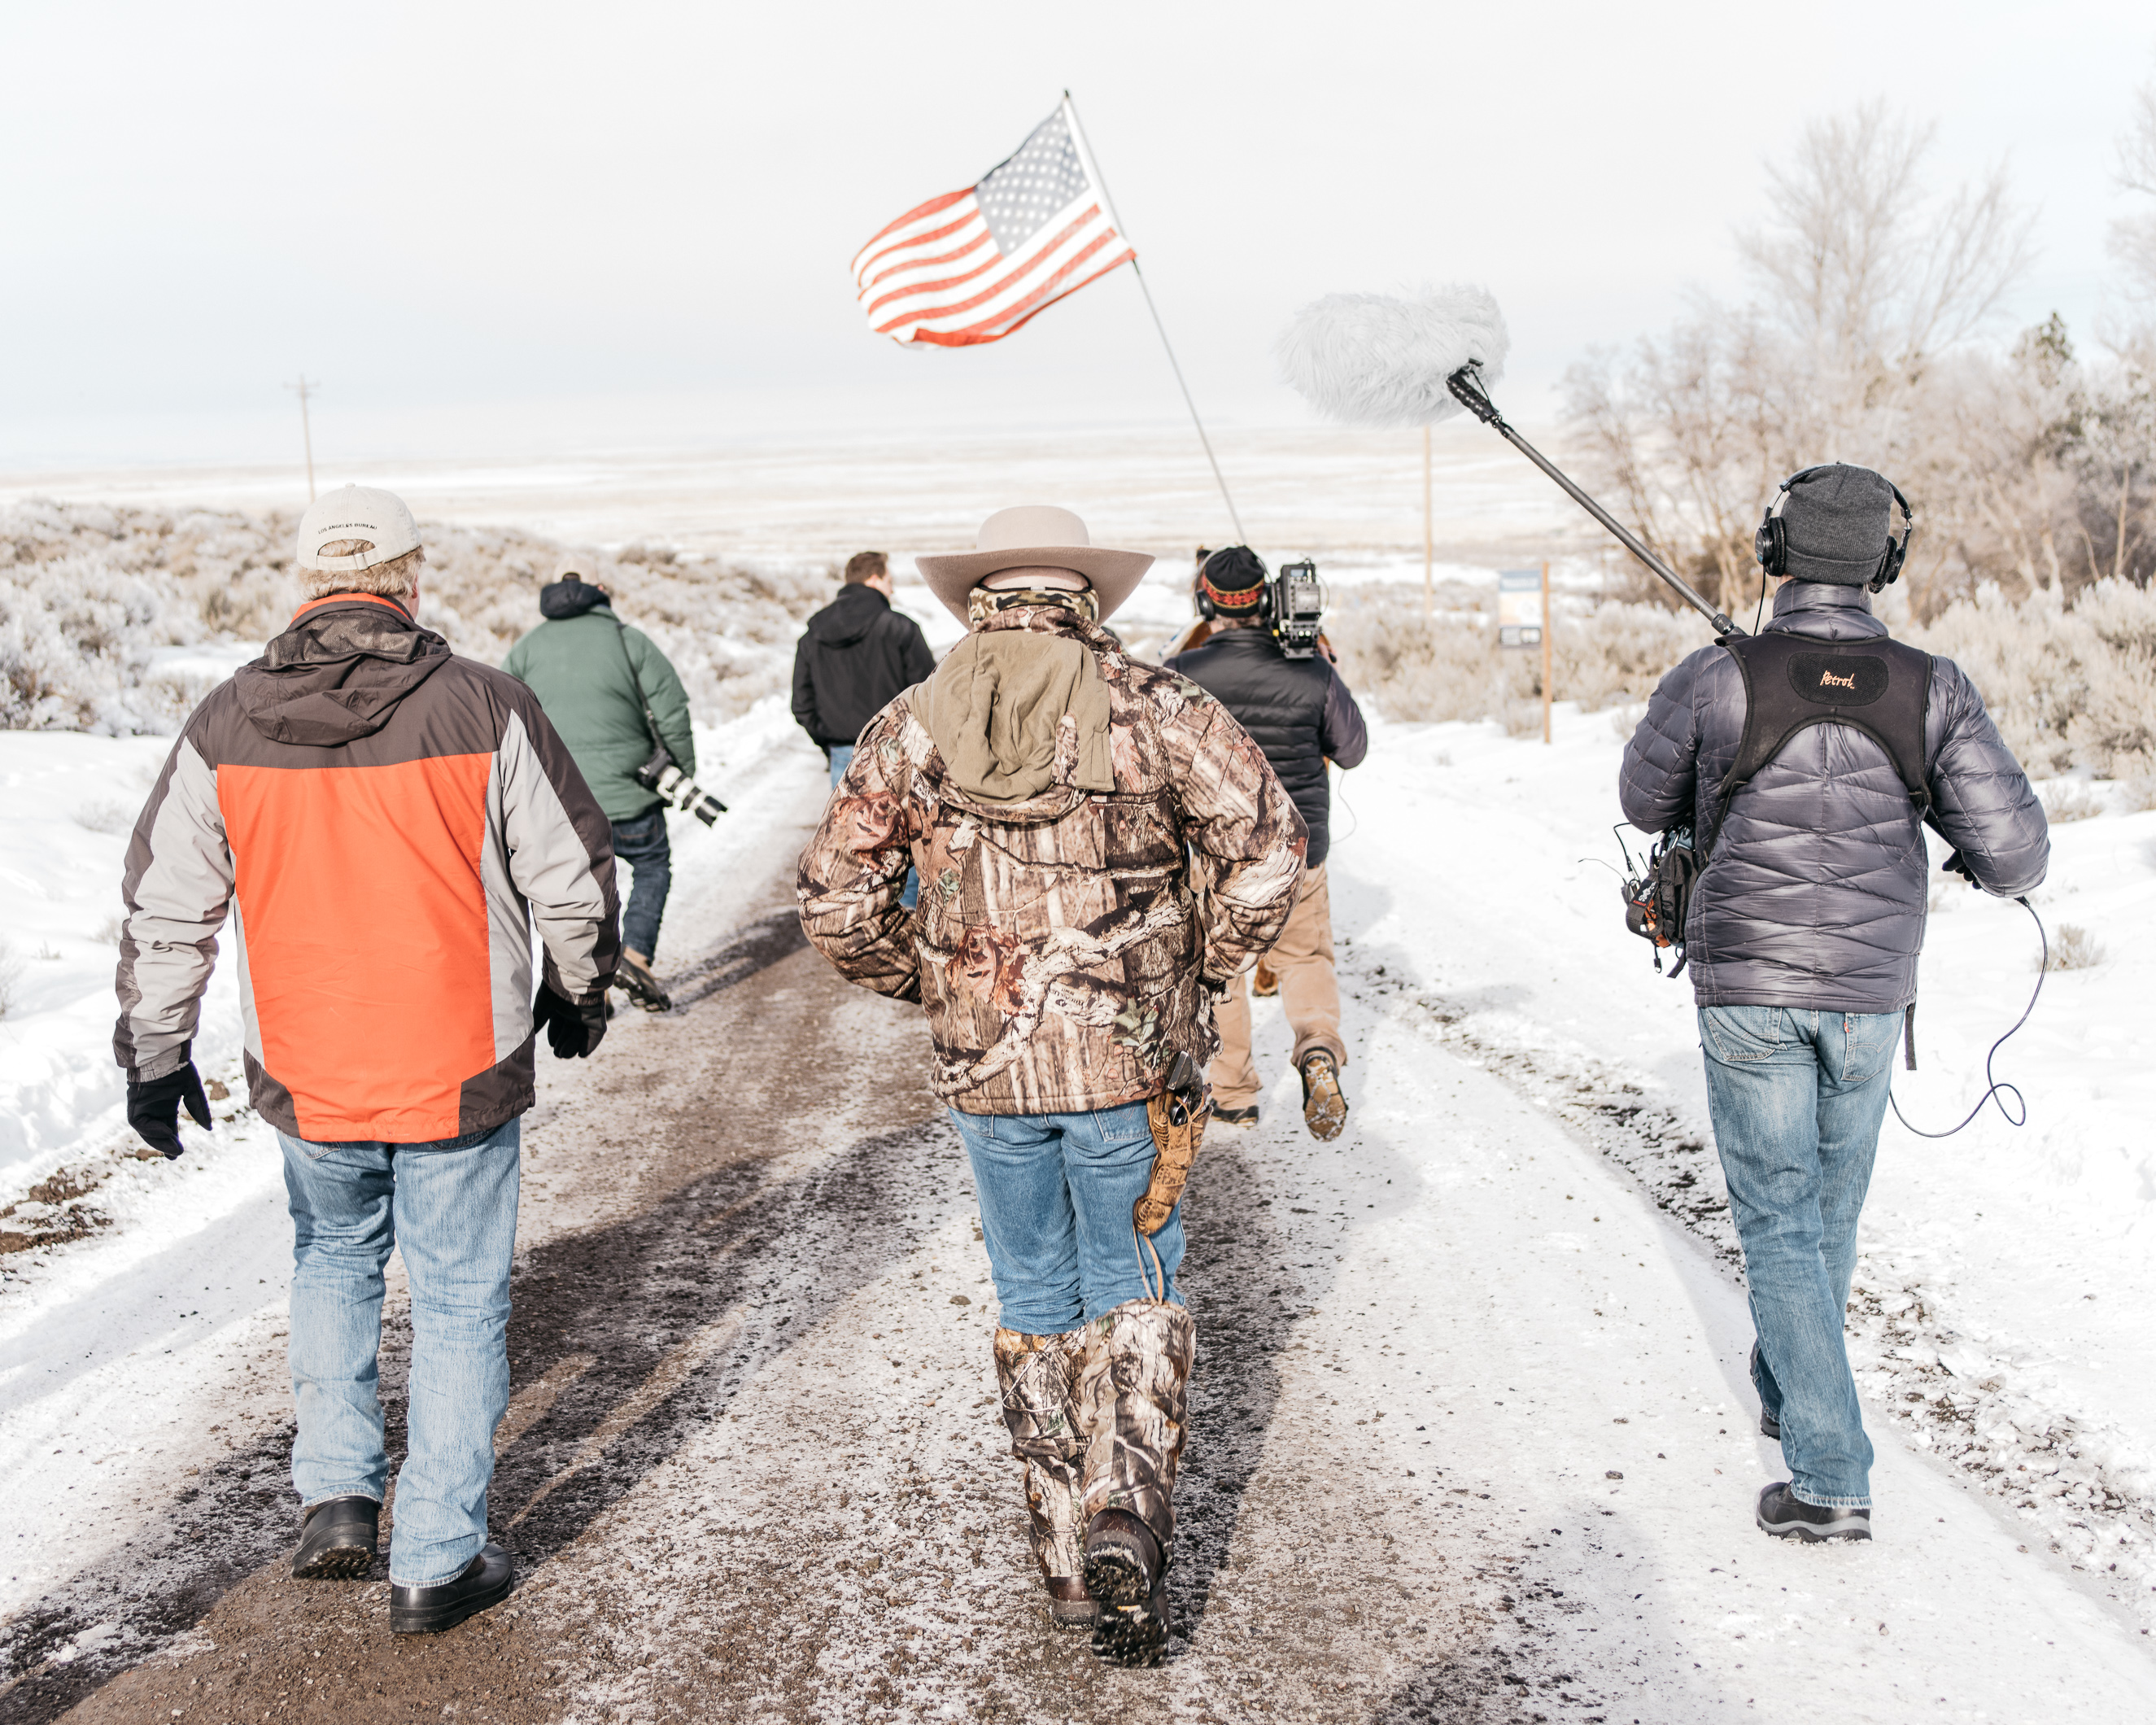 LaVoy Finicum, of Chino Valley, Ariz., walks back to the refuge after speaking with reporters on Jan. 12, 2016.